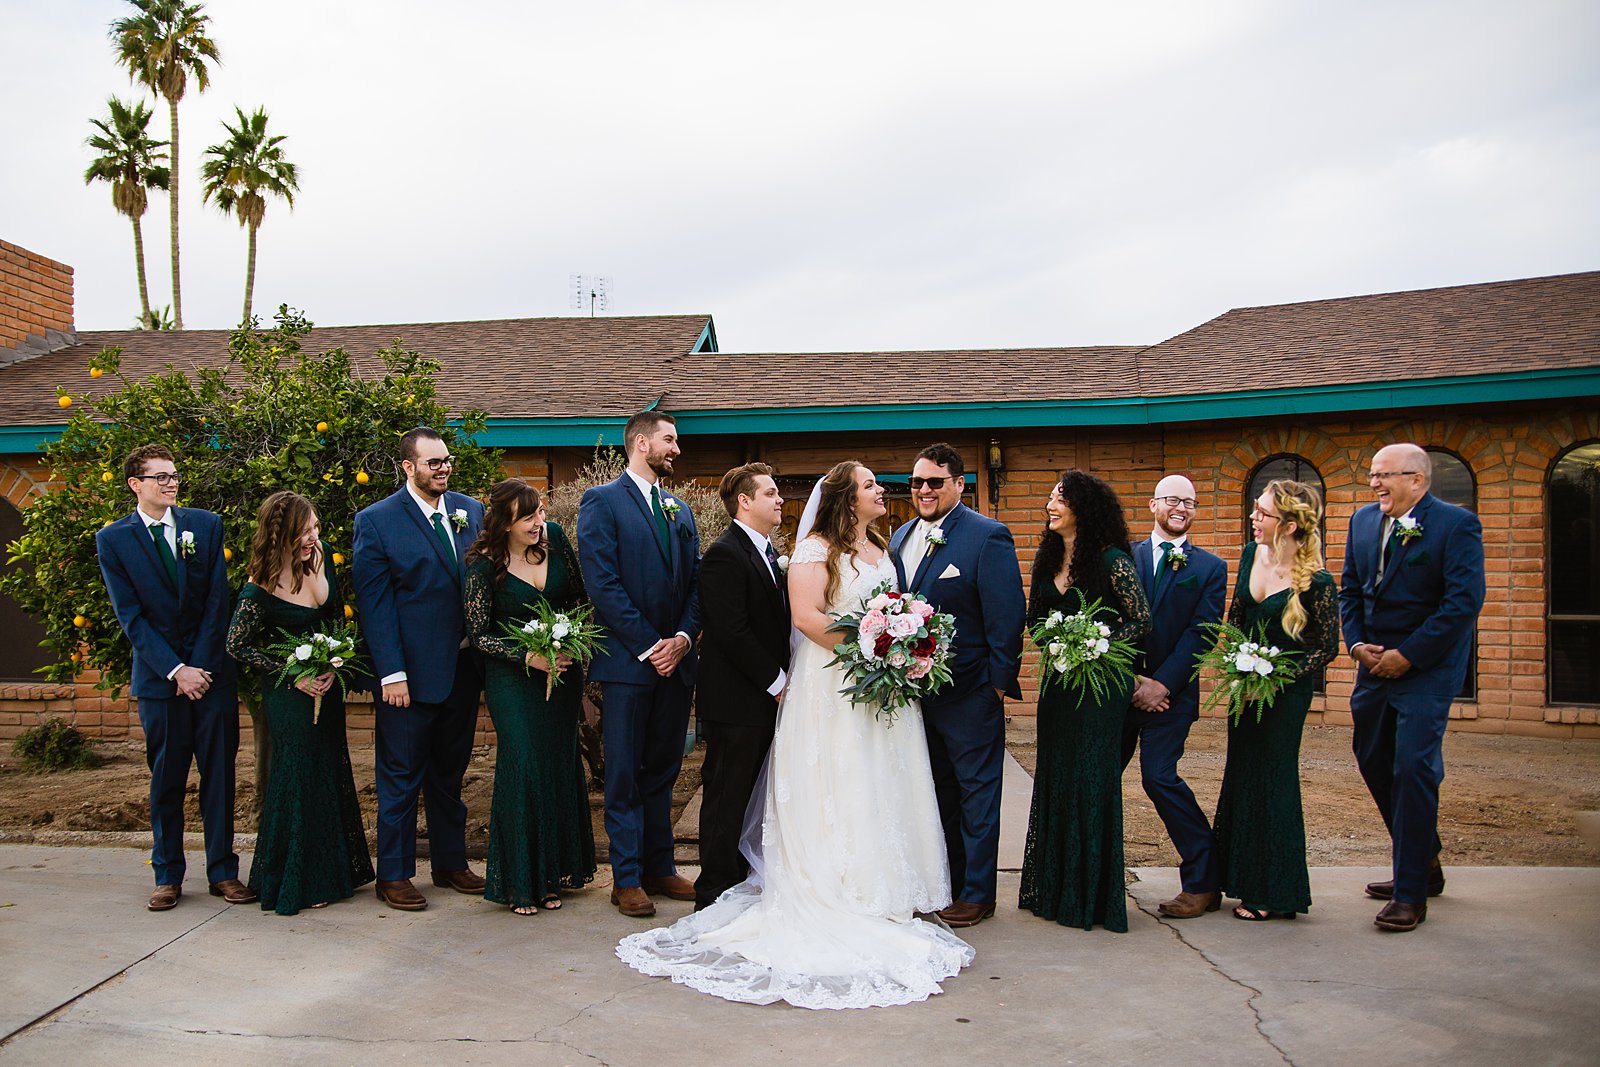 Bridal party laughing together at Backyard wedding by Casa Grande wedding photographer PMA Photography.